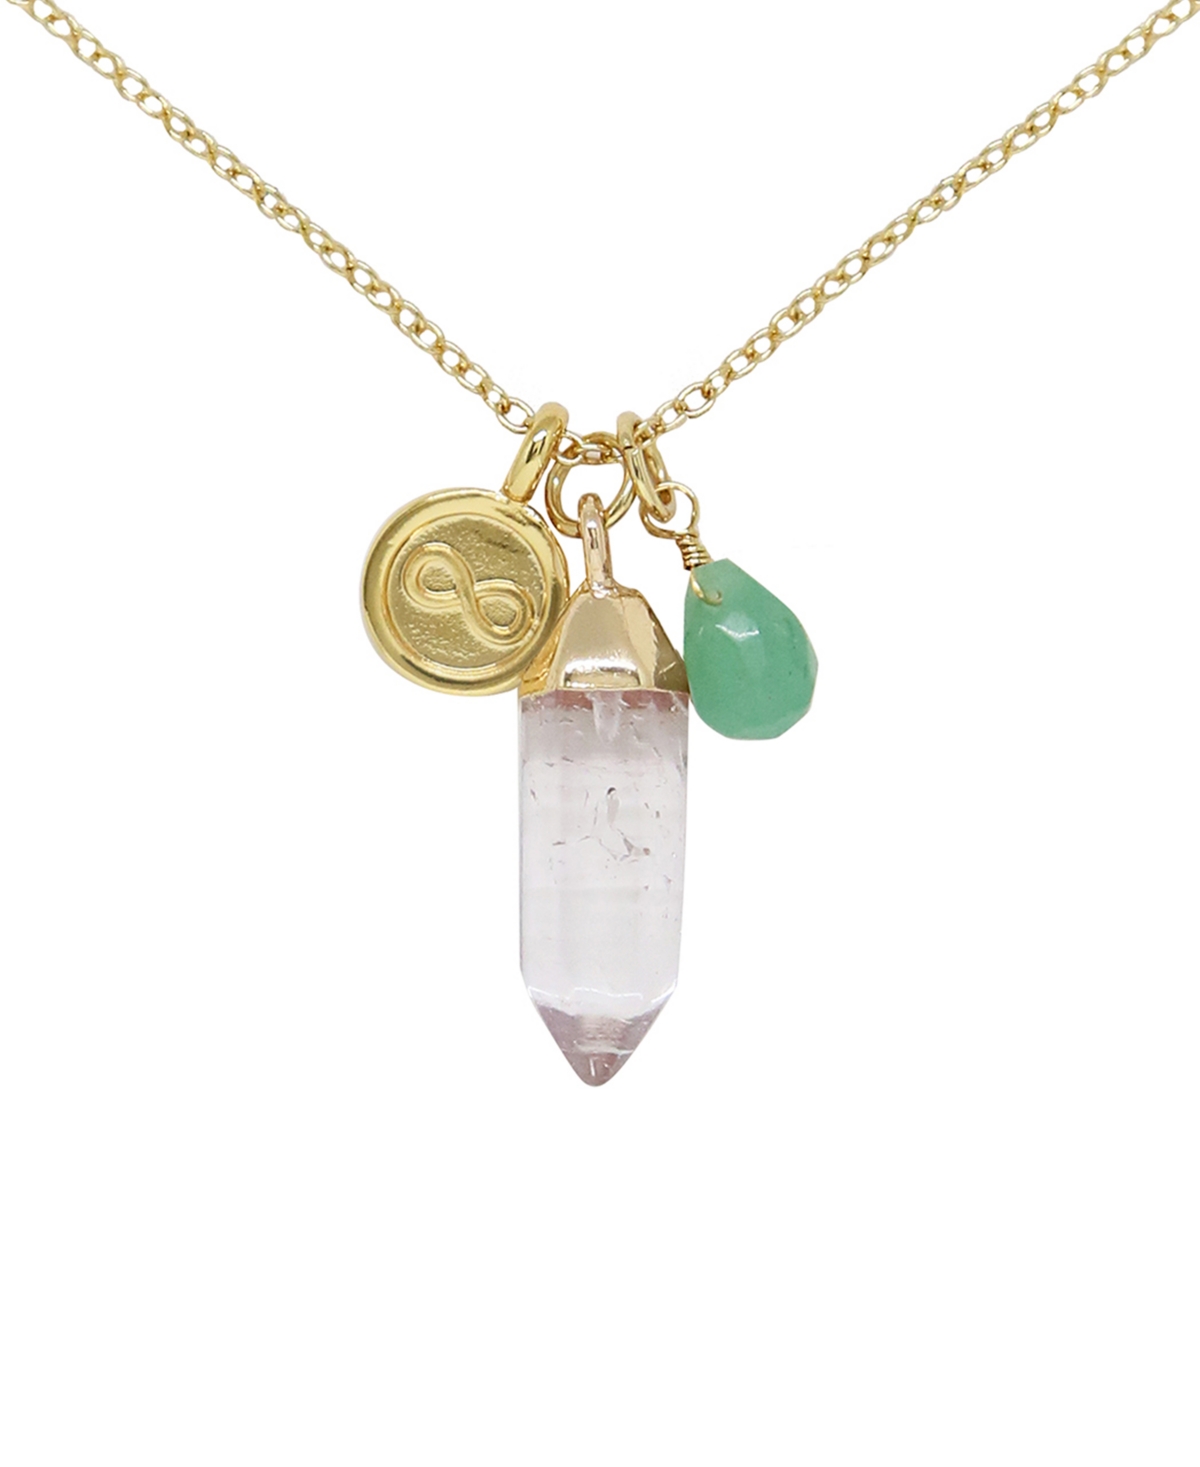 Charged Crystal Quartz Charm Necklace With Aventurine